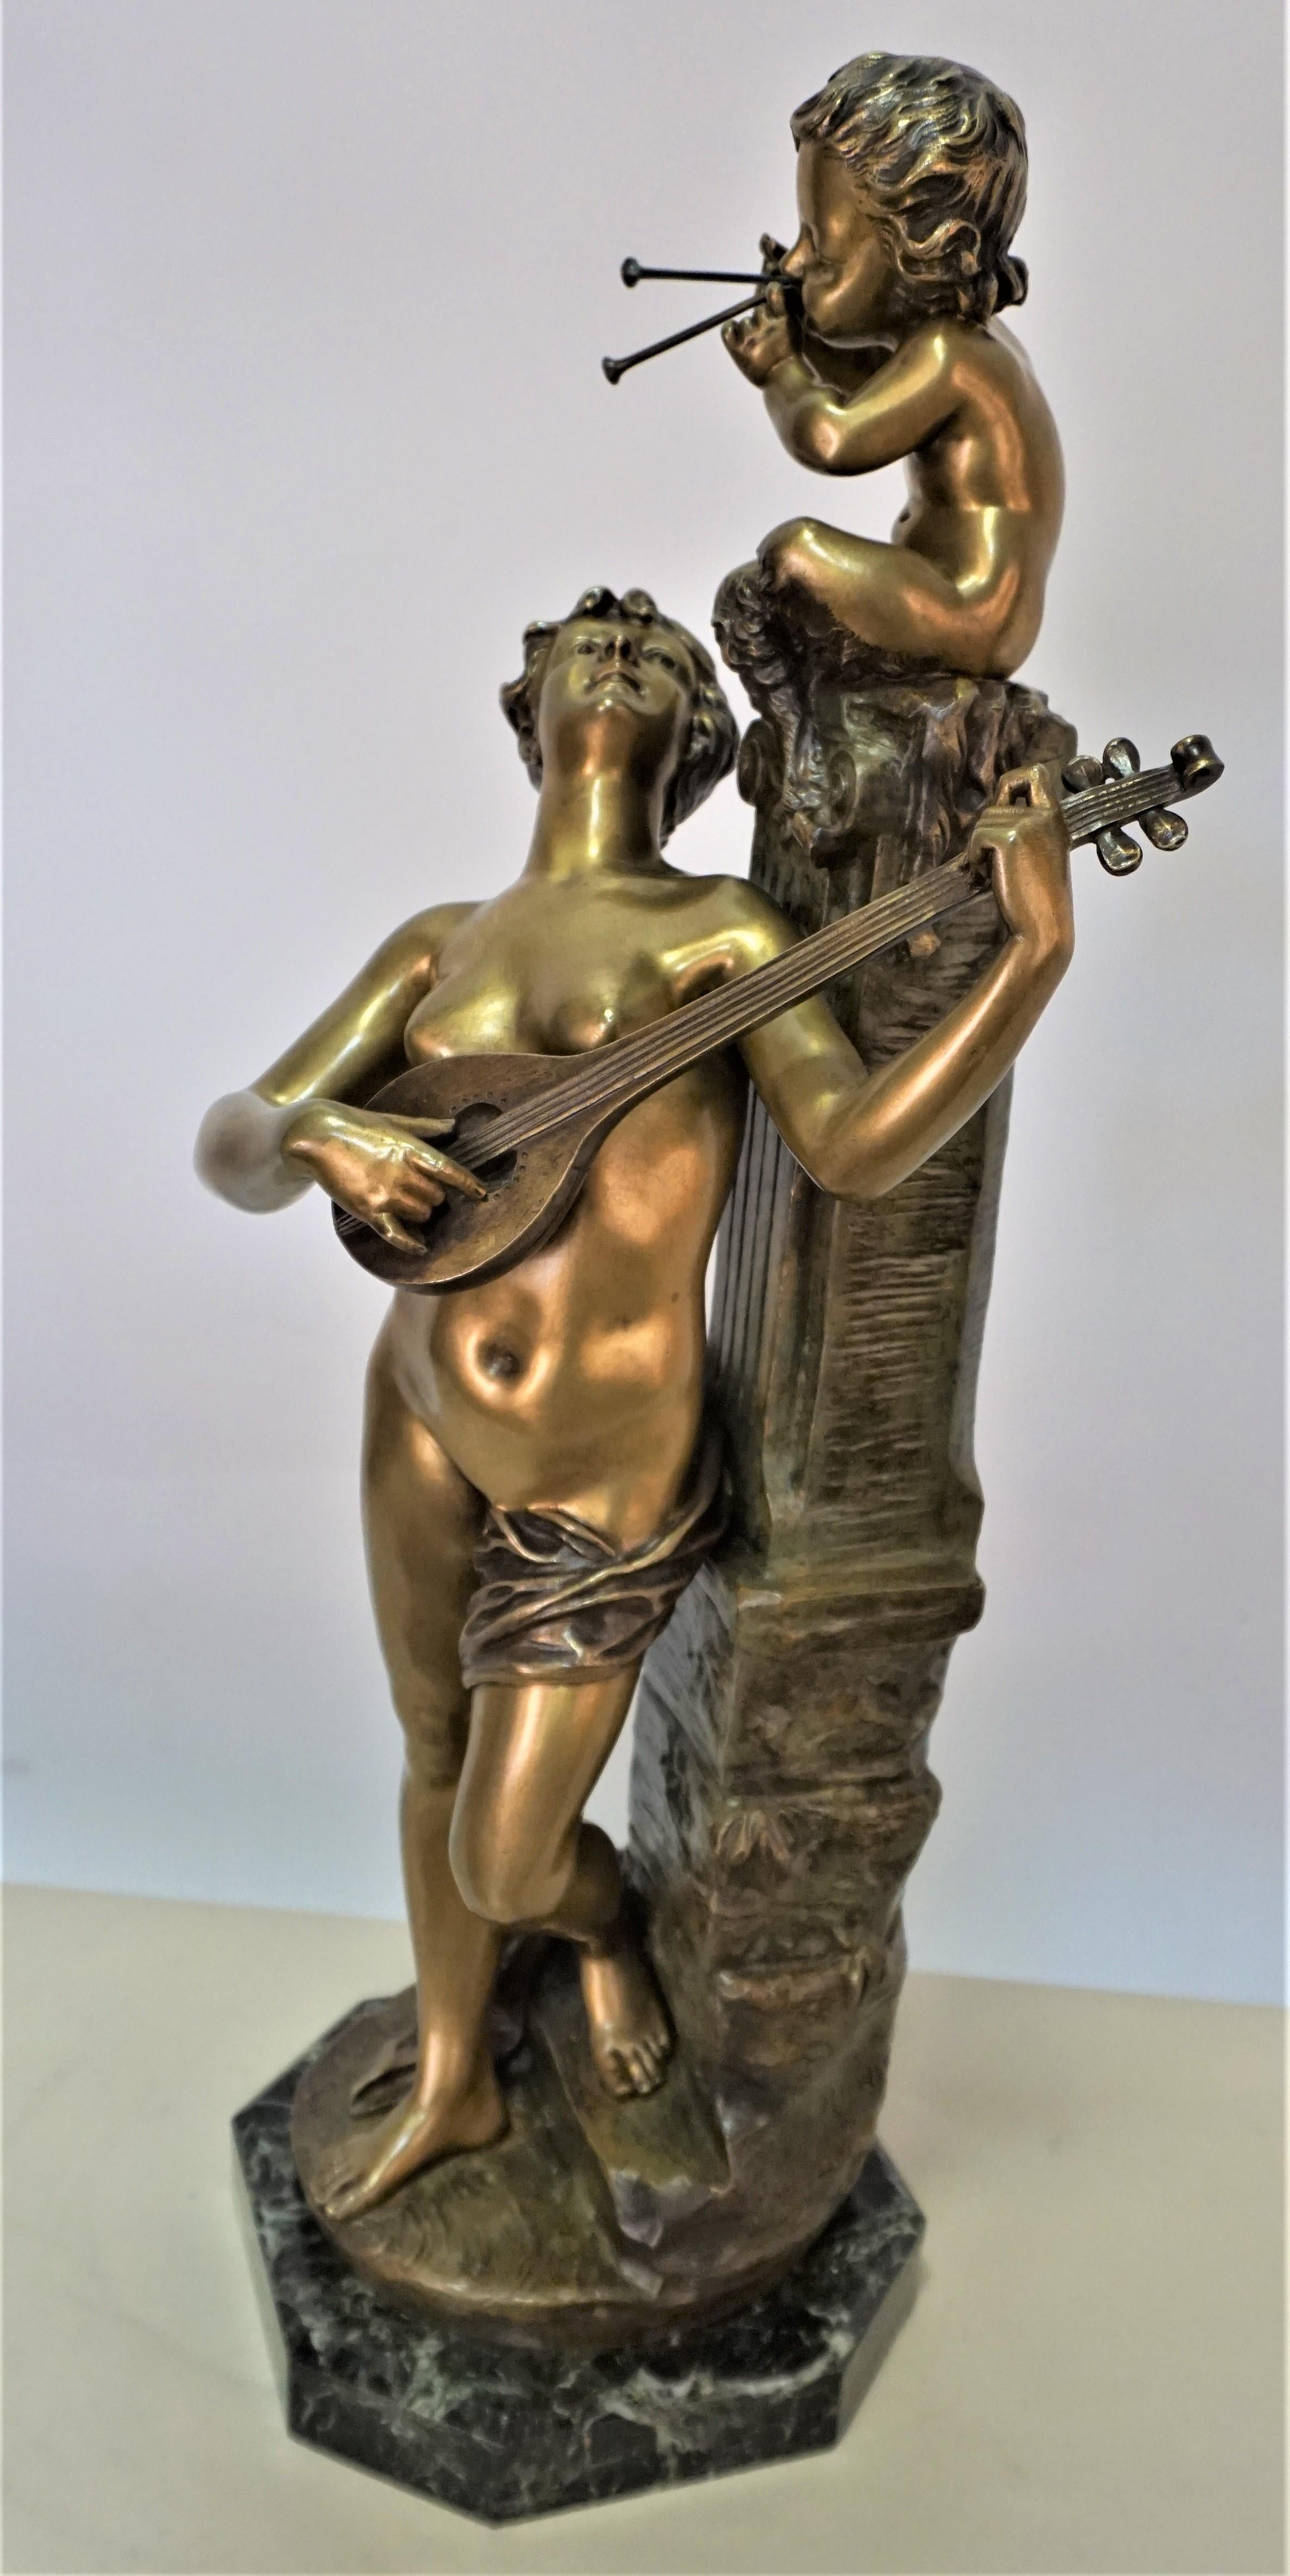 Italian Bronze Bacchante Plying Music with Young Satyr by Aristide De Ranieri 1865-1929 For Sale